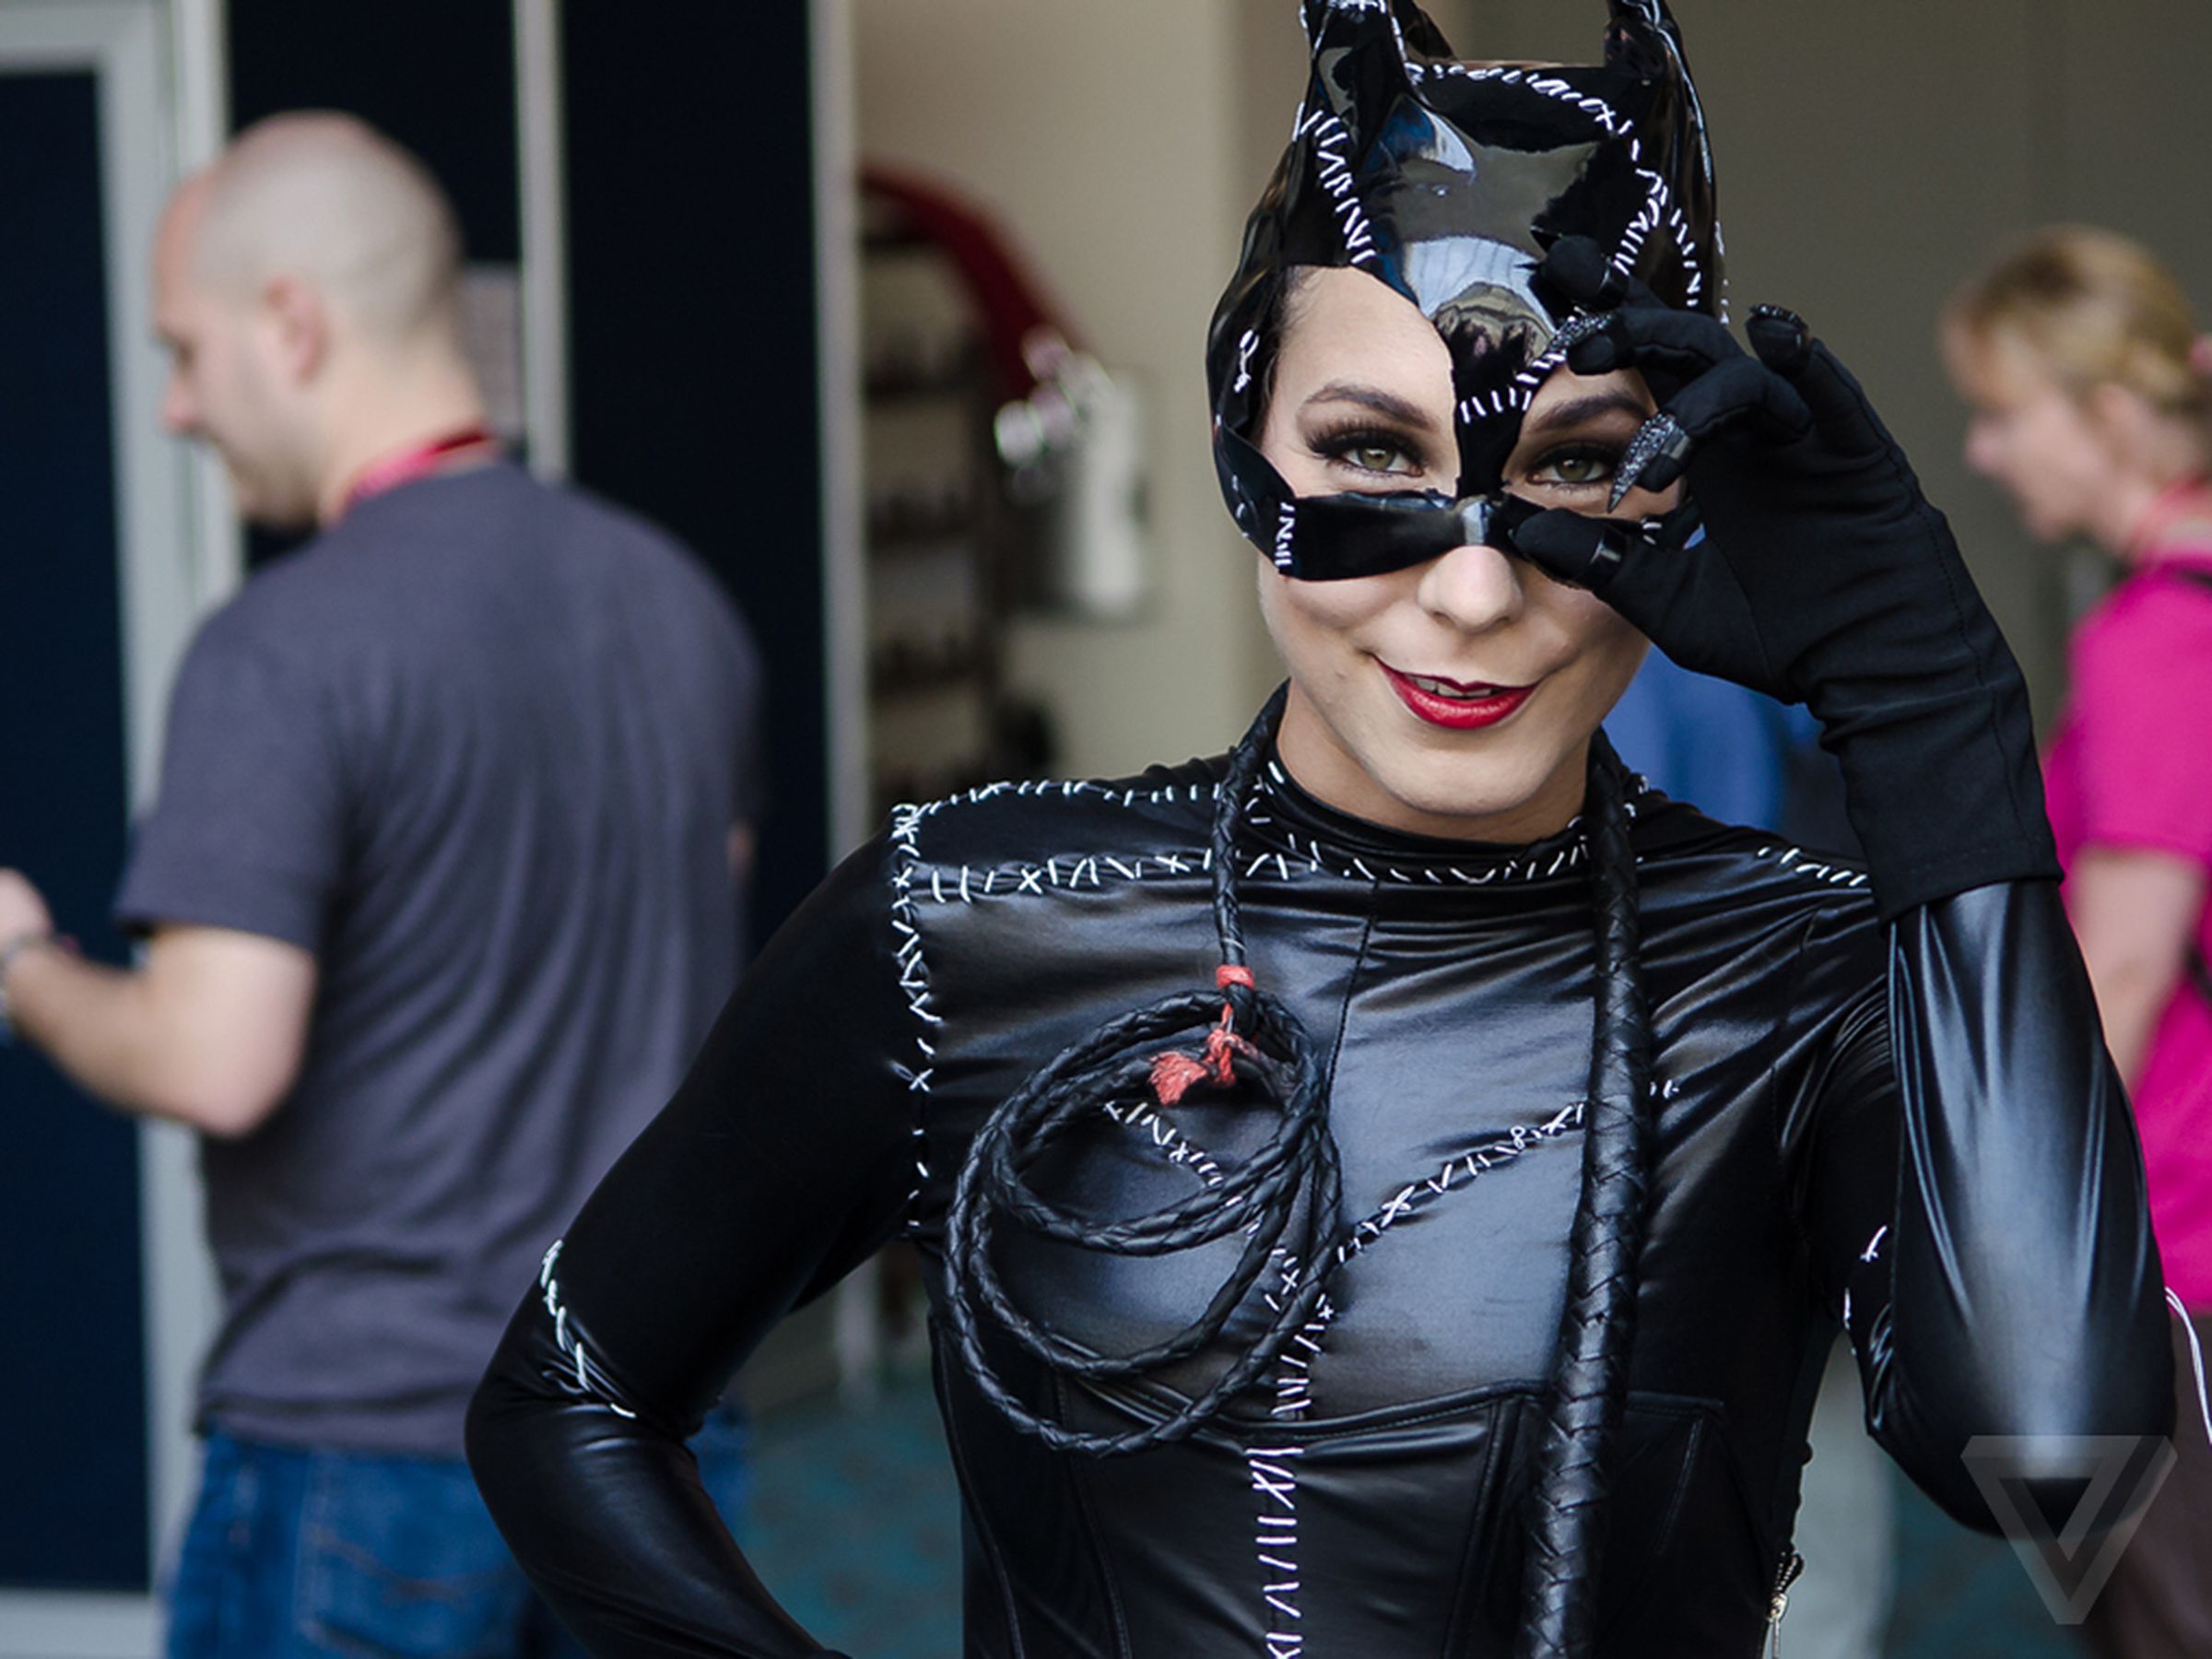 Cosplay at Comic-Con 2014